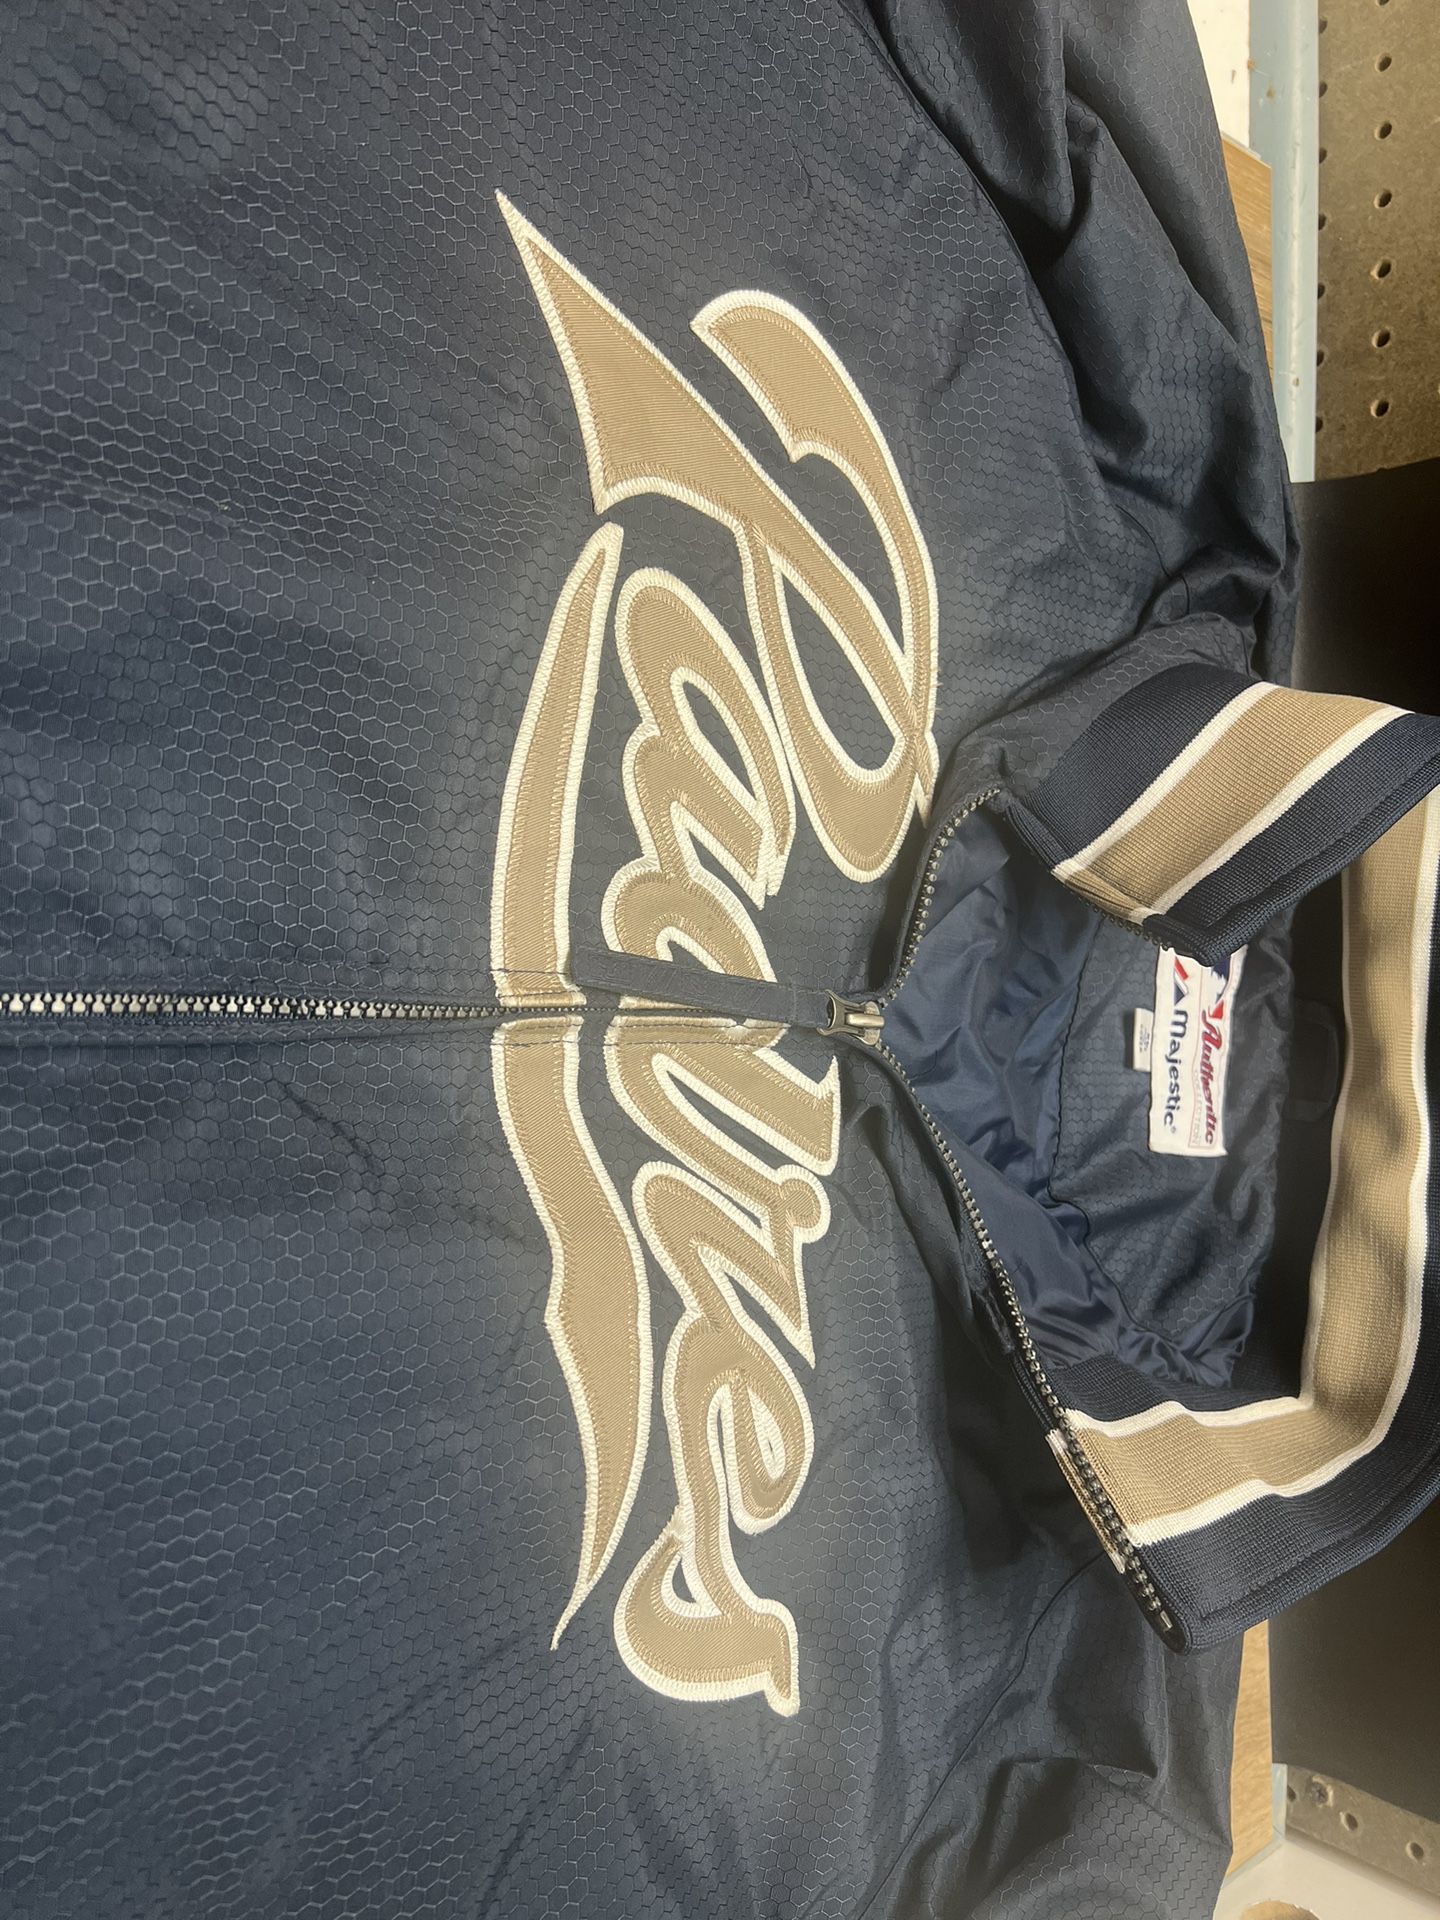 Vintage San Diego Padres Jacket AUTHENTIC Majestic MLB Collection ADULT XL  for Sale in Spring Valley, CA - OfferUp